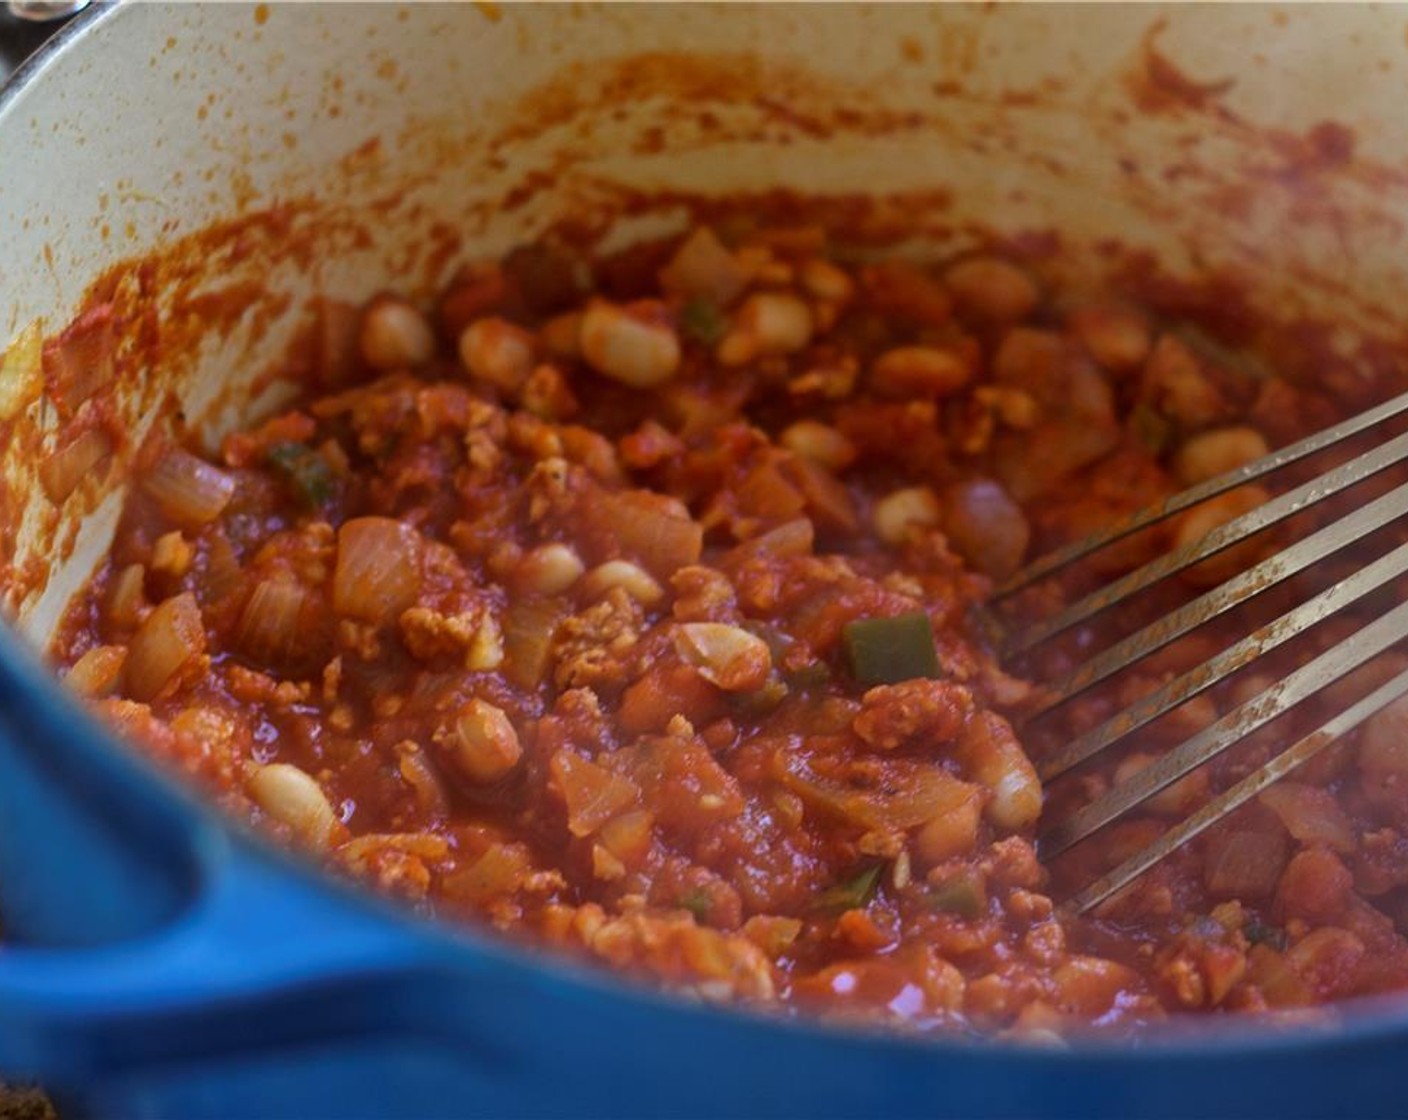 step 5 Add the Canned Tomato Purée (1 1/2 cups) and Lima Beans (1 1/2 cups) then simmer until the sauce is thick and the sausage is cooked, about 5 minutes on medium heat. Taste and add Salt (to taste) and Ground Black Pepper (to taste) as needed.